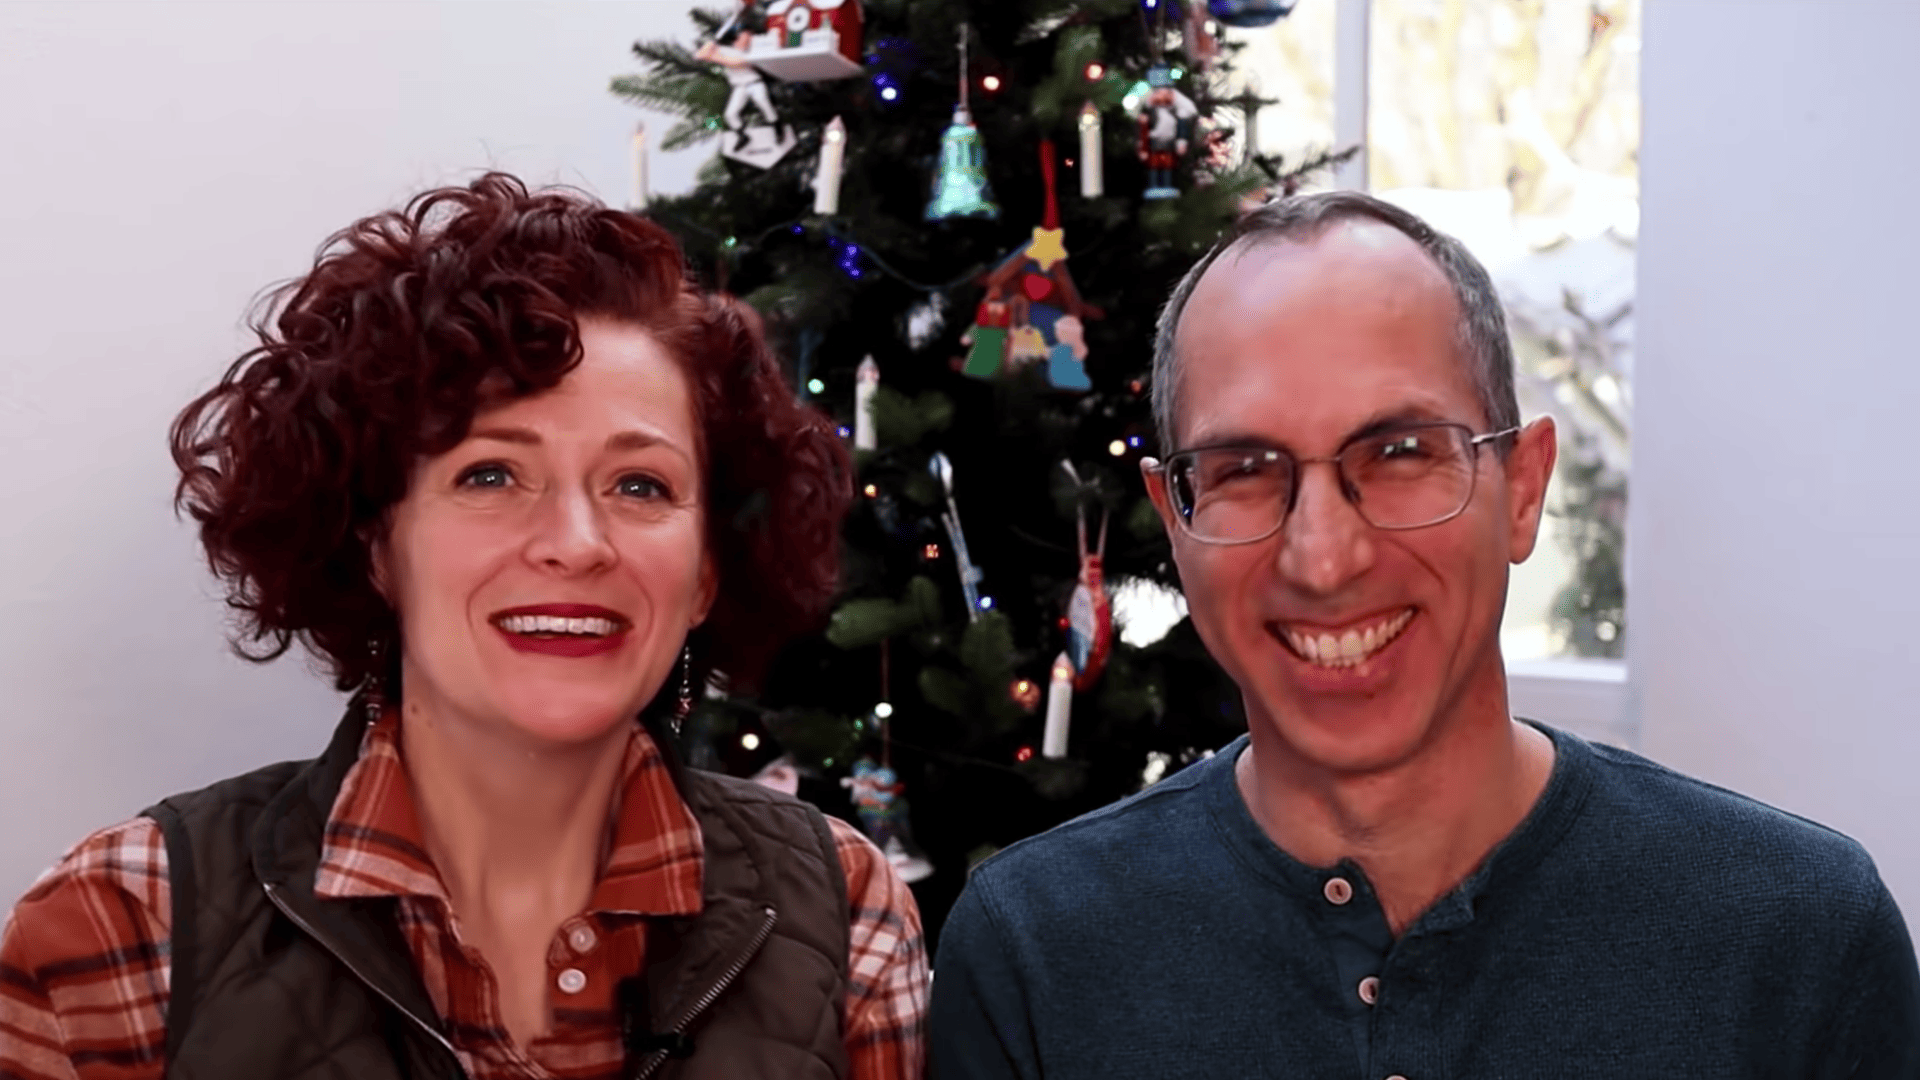 Will We Celebrate Christmas the German or American Way?